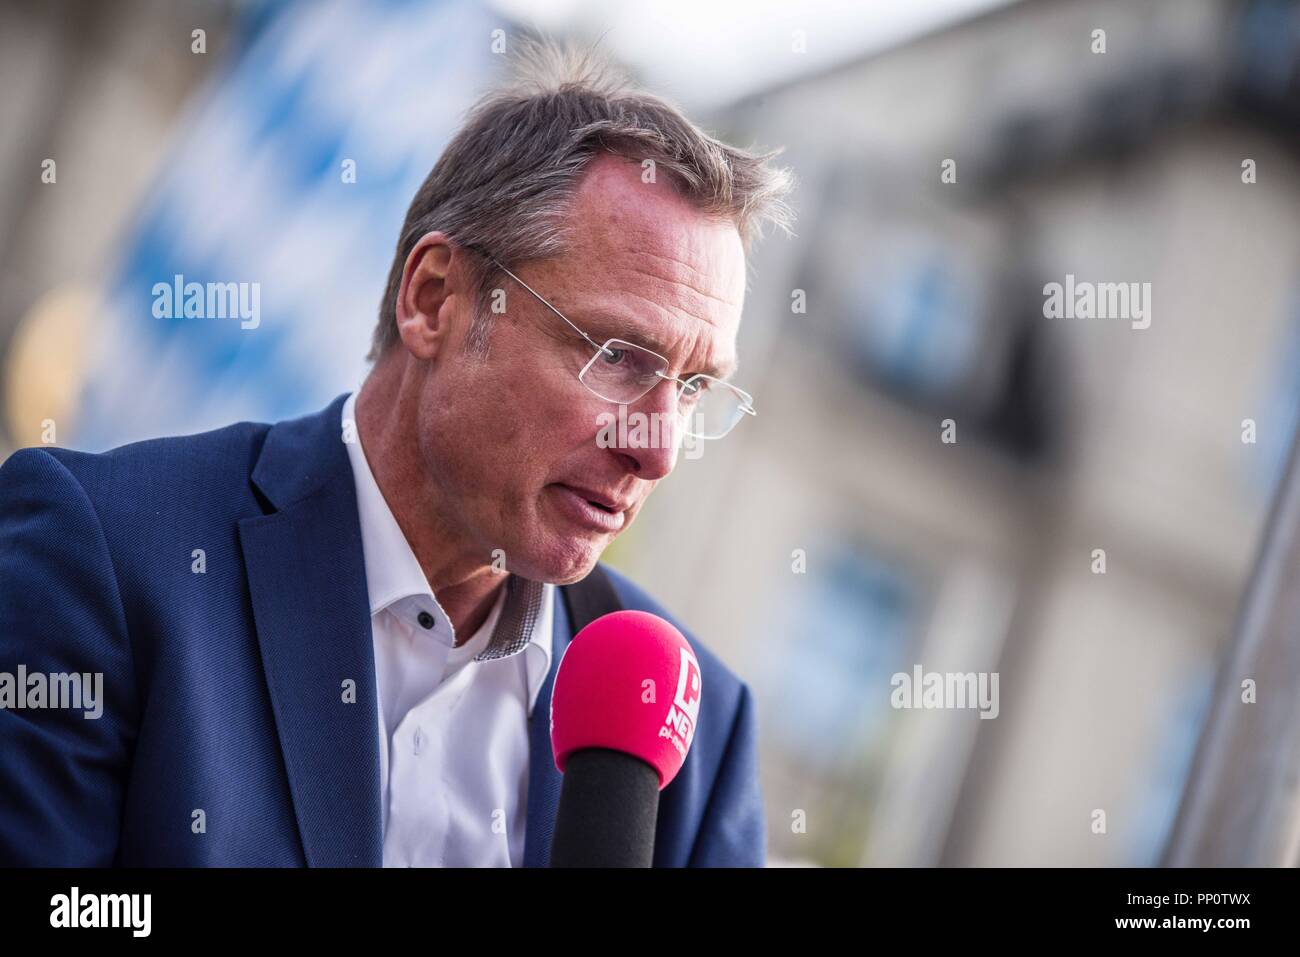 September 22, 2018 - Munich, Bavaria, Germany - MICHAEL STUERZENBERGER of the extreme-right spectrum holding a microphone of the right-extremist portal PI News. This Oktoberfest Saturday the far-right to extreme-right Alternative For Germany (AfD) party organized two rallies in the Munich city center, one at Max Joseph Platz and the second at Stachus. In attendance were numerous figures of the extreme-right spectrum, including neo-nazis, Heinz Meyer of Pegida Munich who is under terrorism monitoring, and members of the extremist Identitaere Bewegung. (Credit Image: © Sachelle Babbar/ZUMA Wire Stock Photo